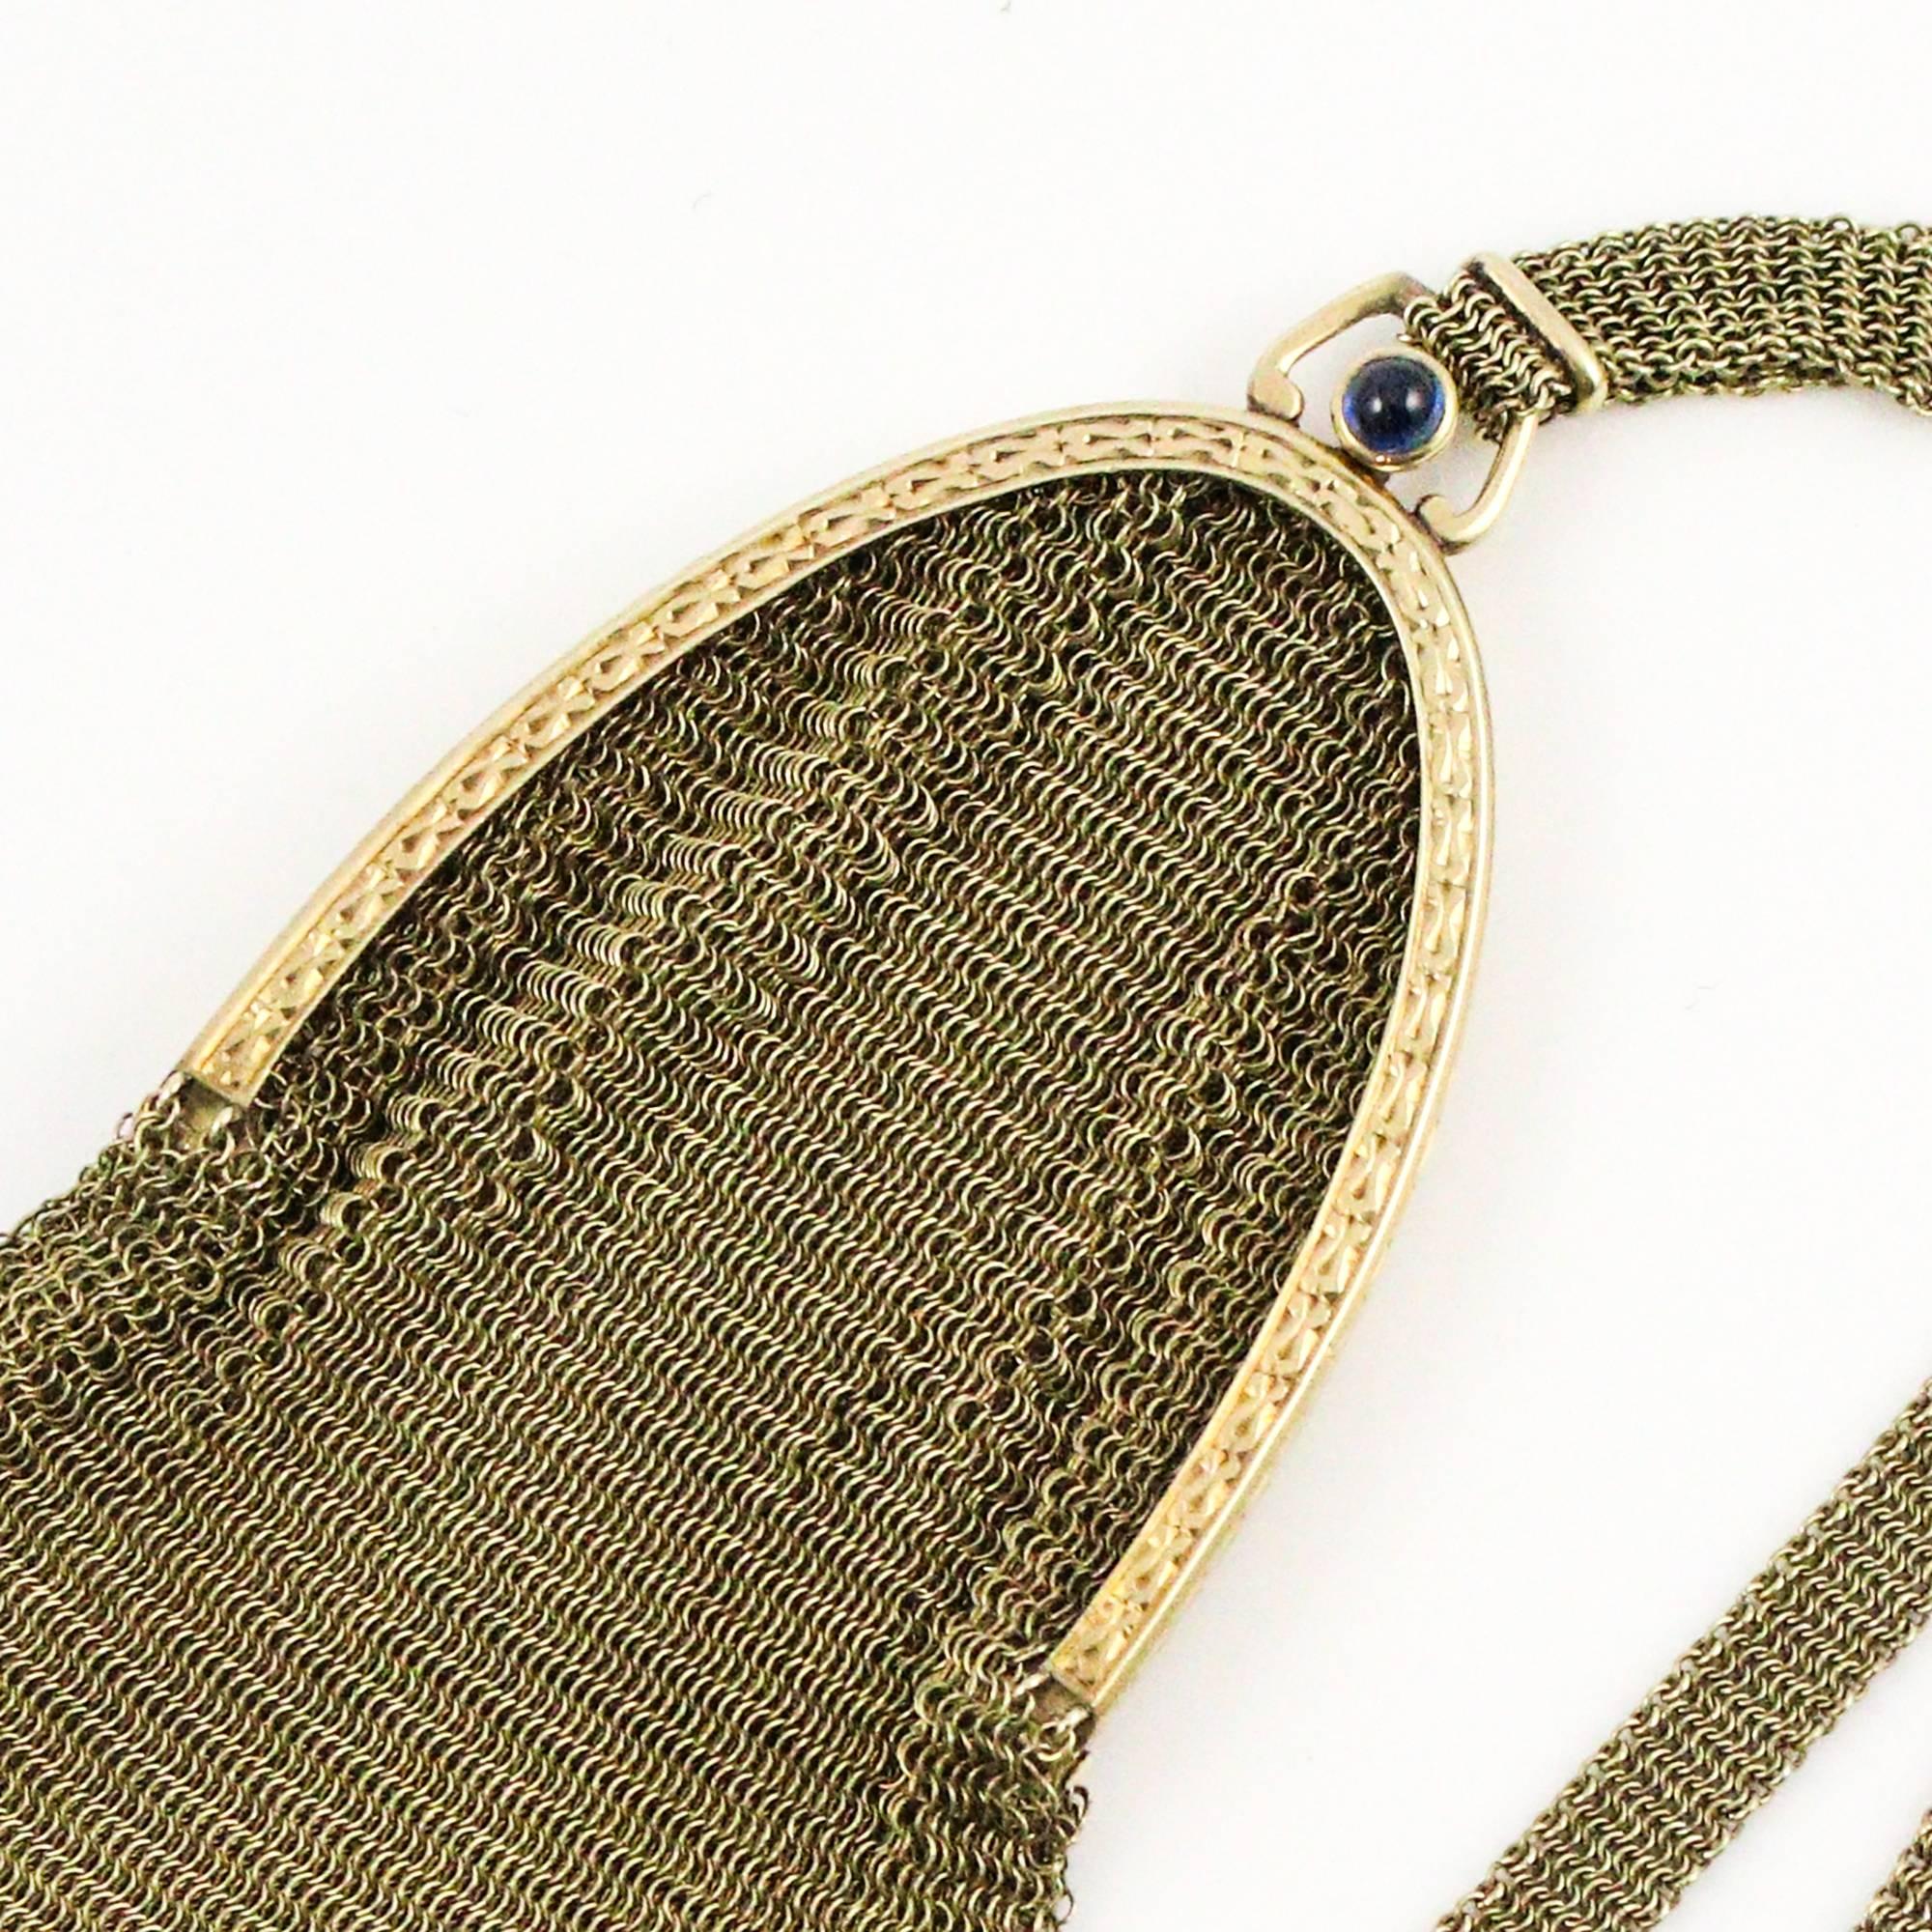 This Victorian mesh style 14k yellow gold purse features intricate designs of a seed pearl tassel drop, engraving on the rim, a wrist strap decorated with a floral sliding piece and a cabochon blue sapphire clasp. The purse is in remarkable shape